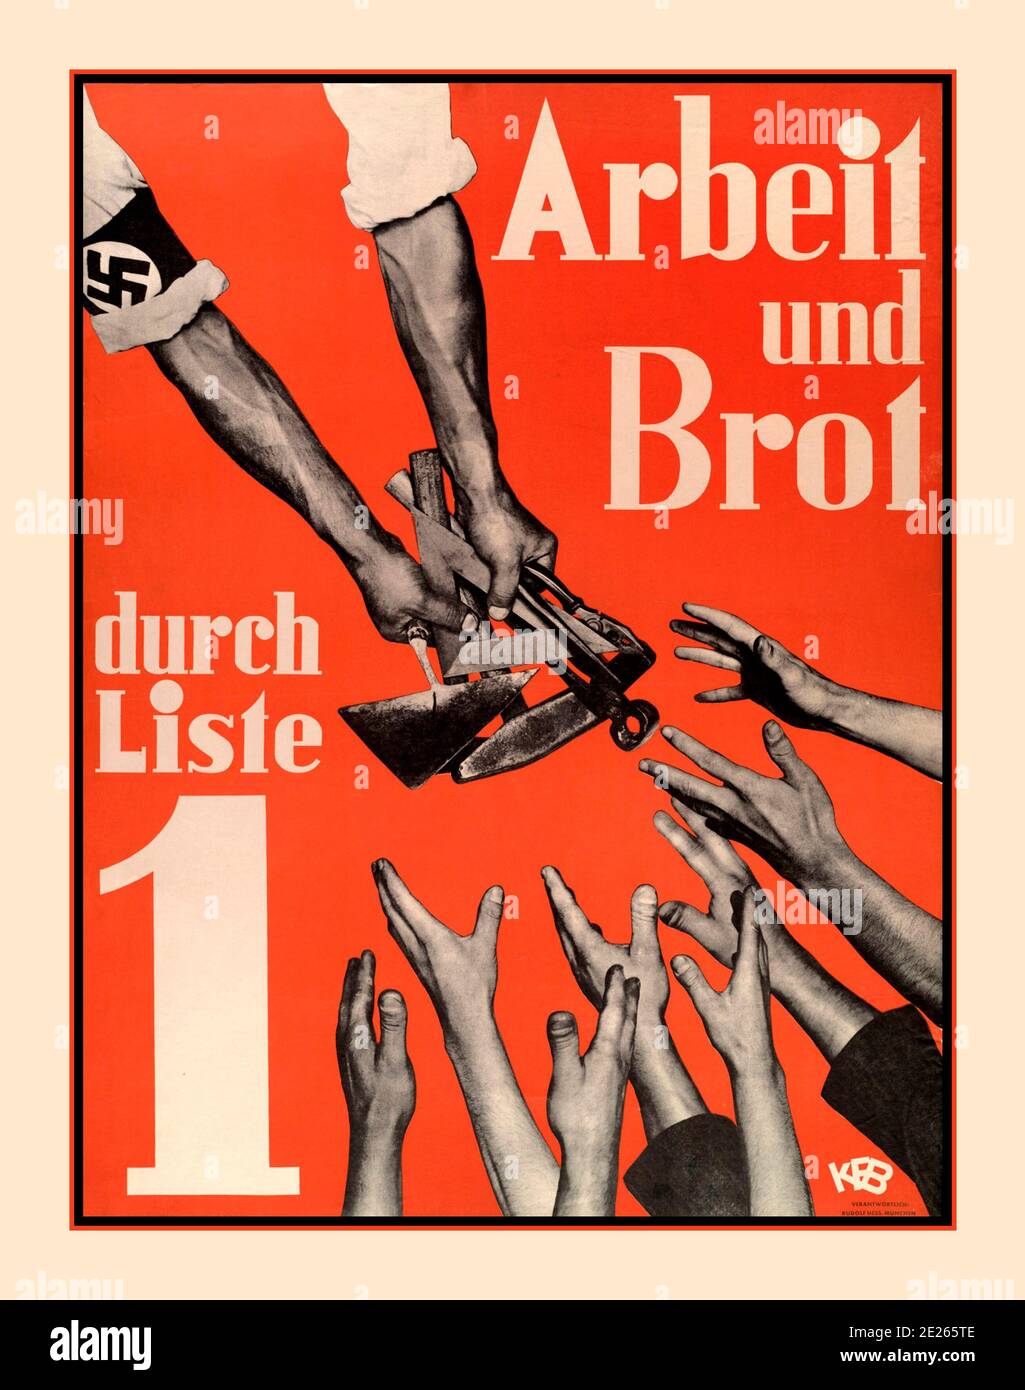 1930’s Germany Election Hitler Propaganda Poster 'Work and Bread' 'ARBEIT UND BROT' , through list 1 Adolf Hitler Political Poster 1930's Election Poster Hands offering tools to work with Swastika emblem on sleeve Stock Photo